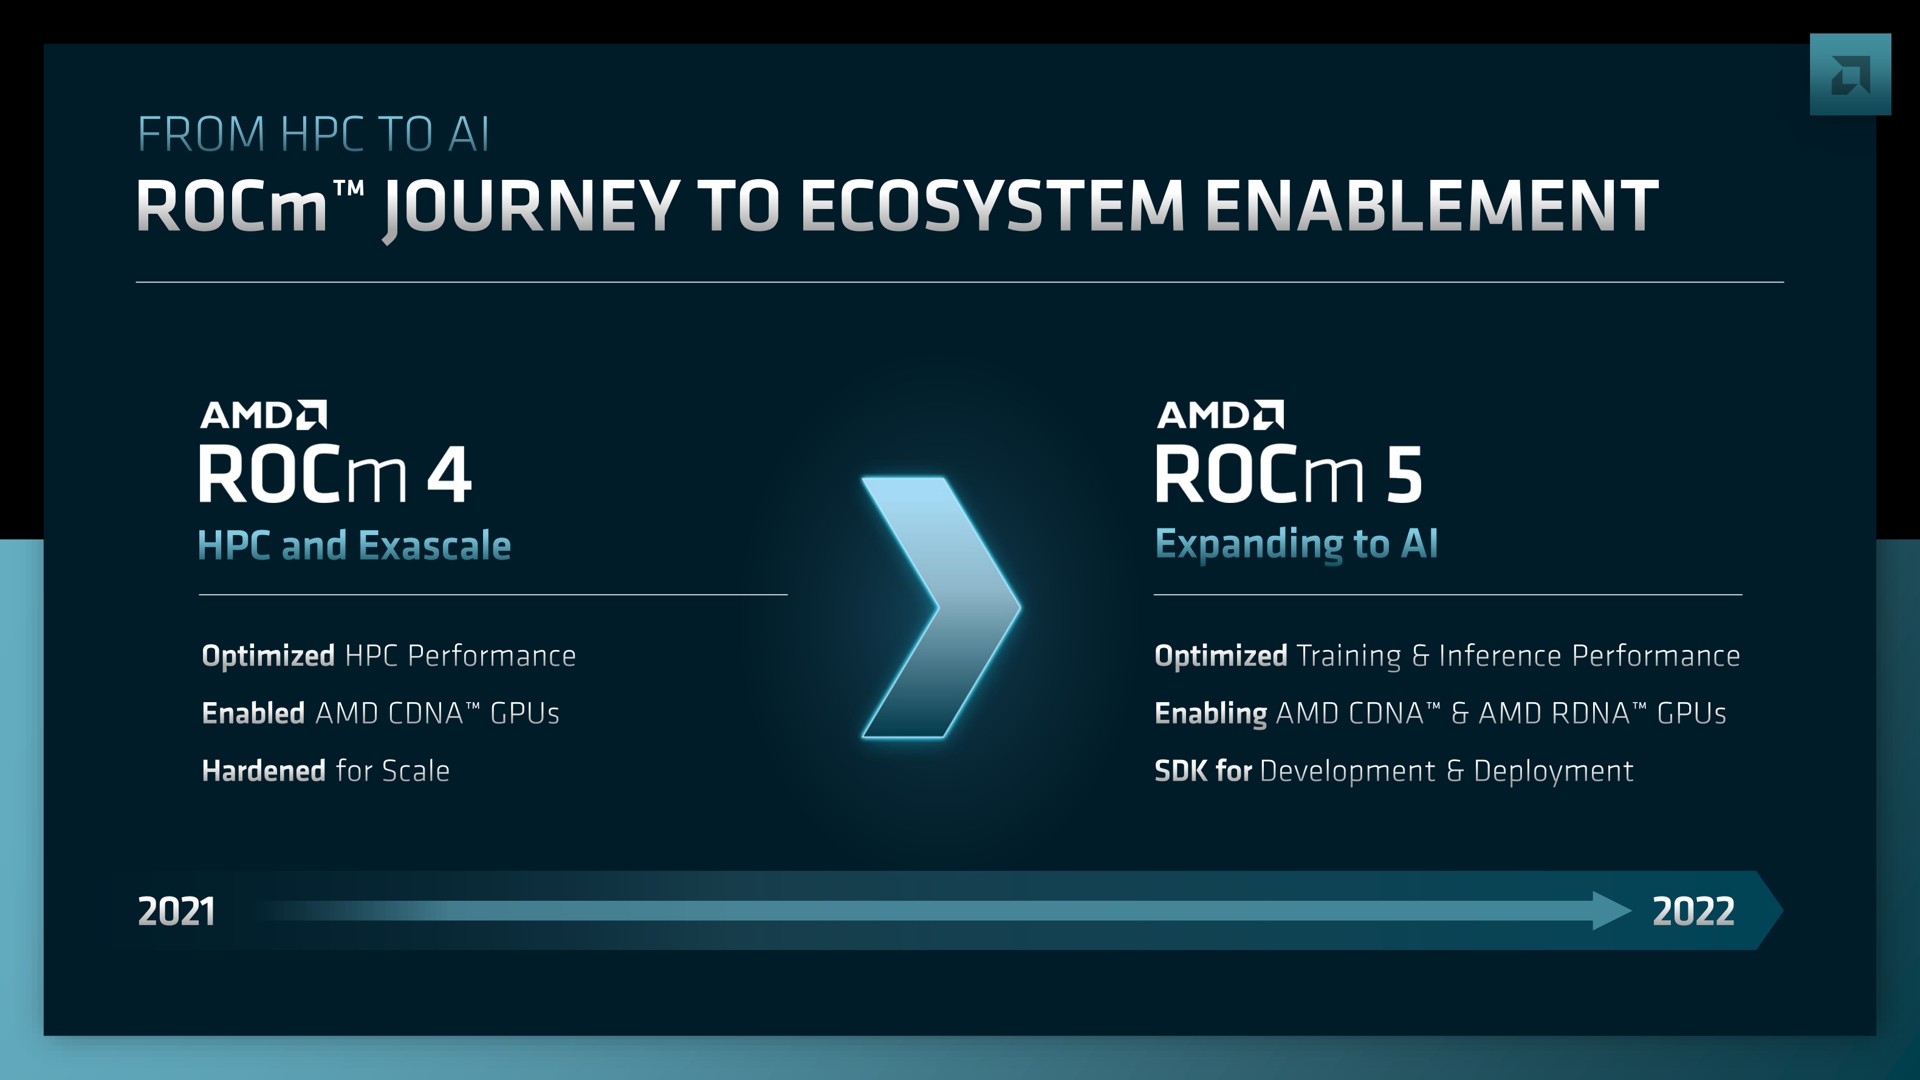 a journey to ecosystem enablement | AMD